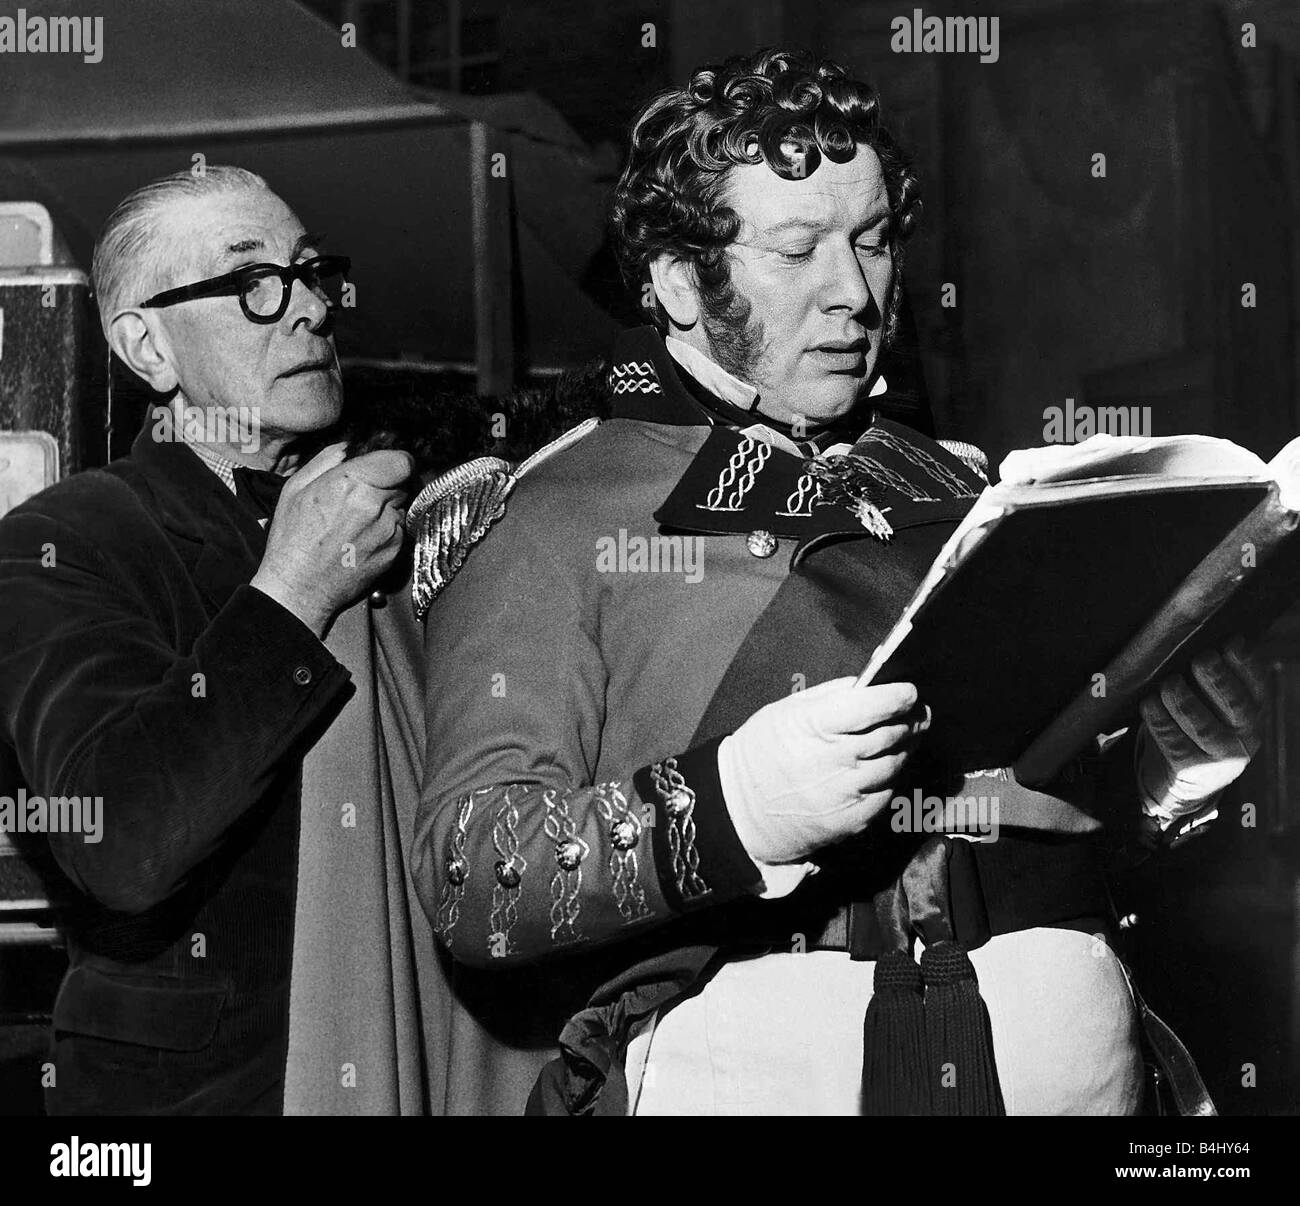 Peter Ustinov actor as King George IV during break in filming at Elstree studios with the wardrobe master holding his cloak February 1954 Stock Photo